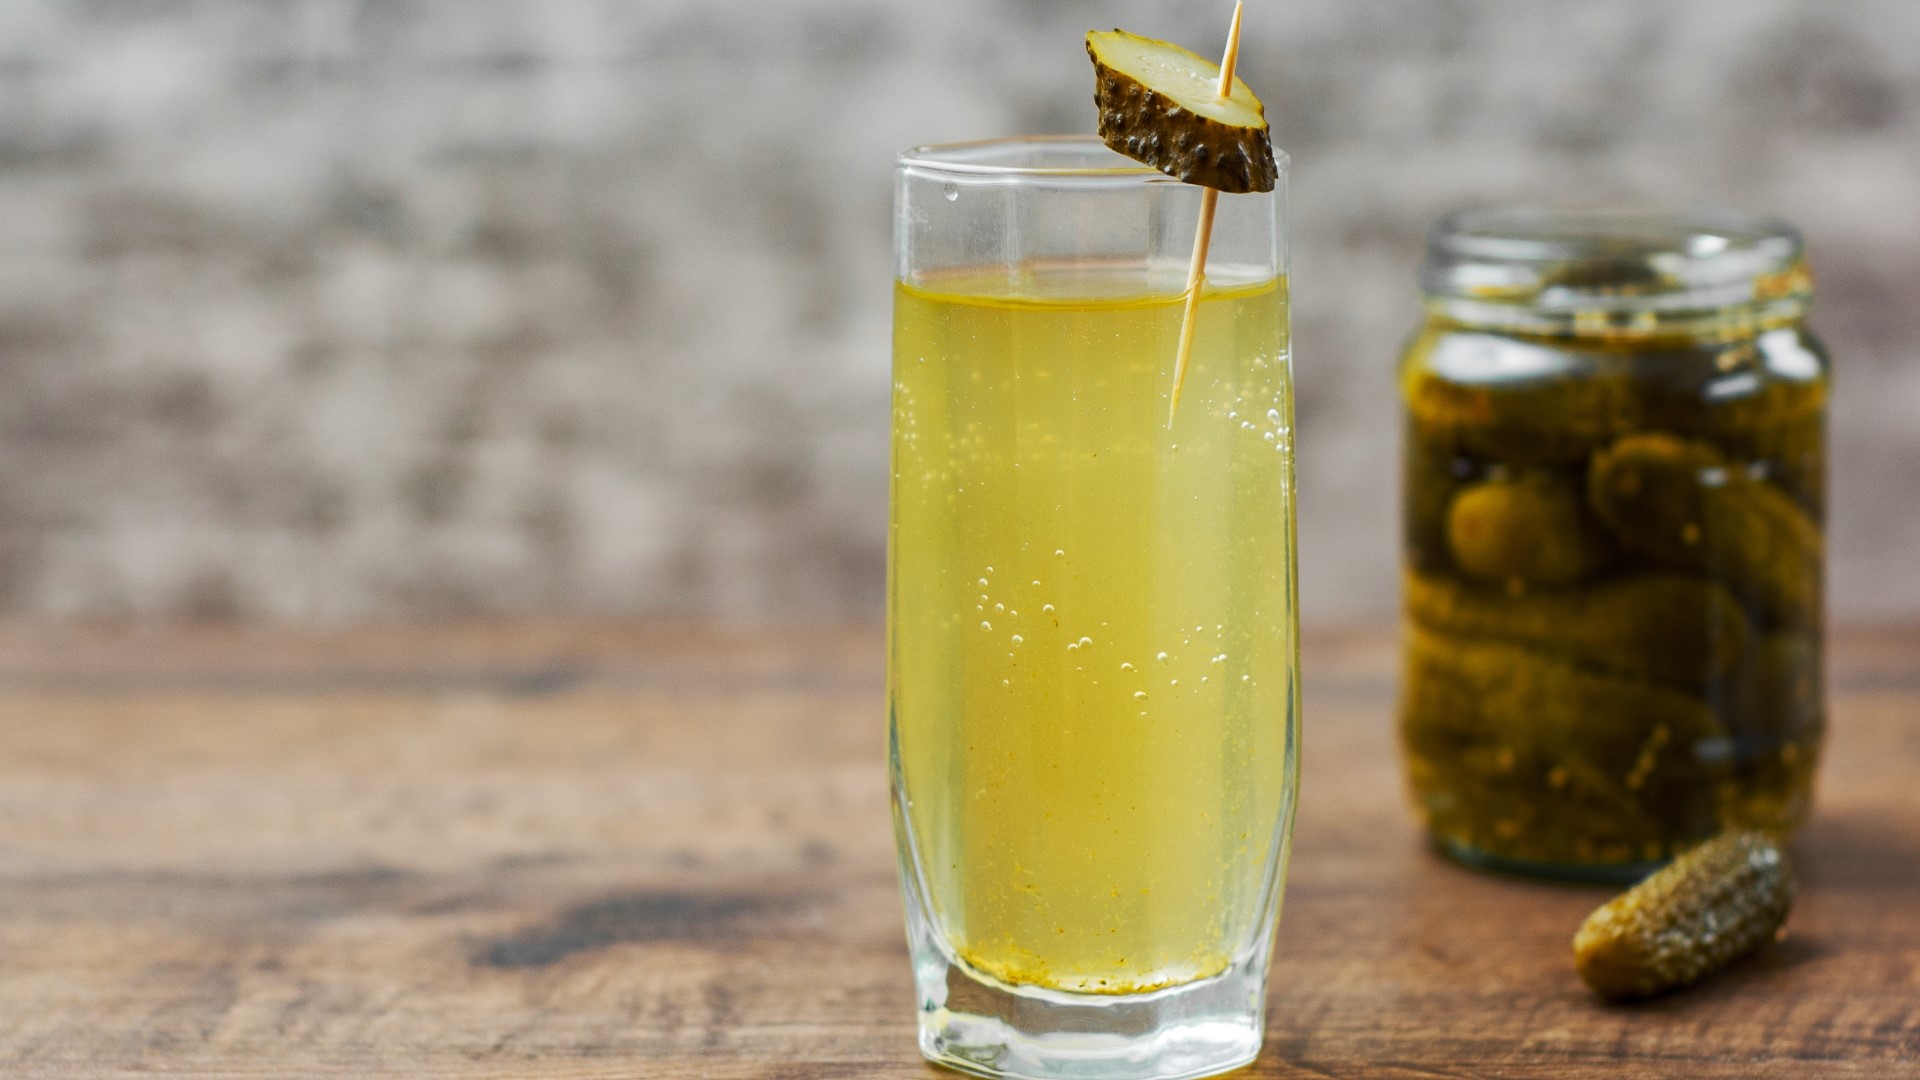 Health experts say pickle juice has plenty of health benefits, from rehydrating the body, and regulating blood sugar, to helping sore muscles.